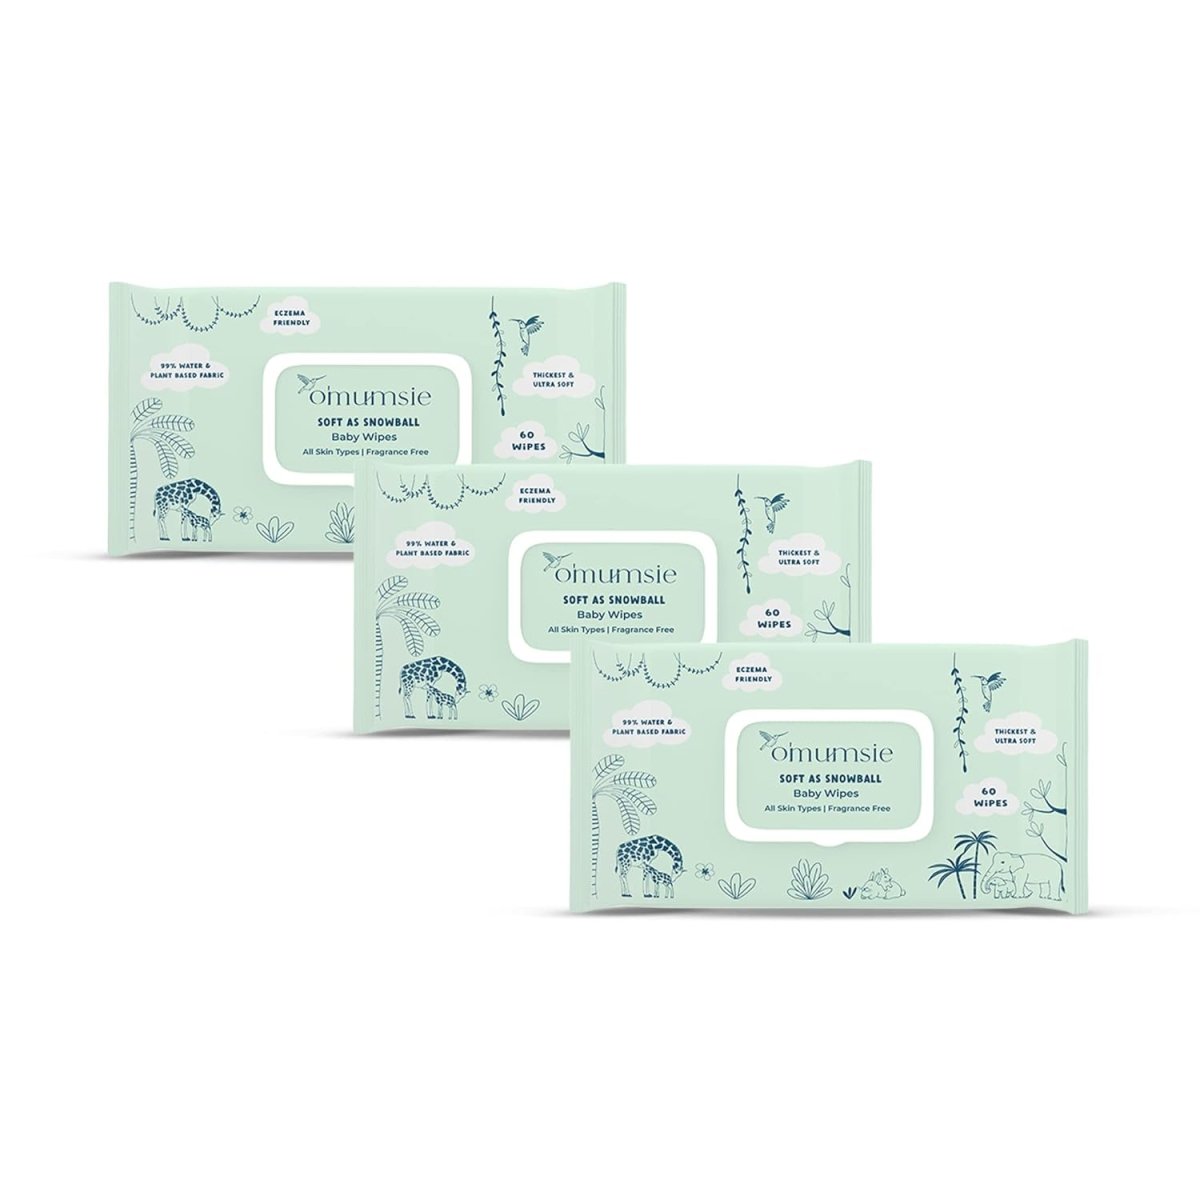 Omumsie 99% Pure Water (Unscented)Thickest Plant Based Baby Wipes Pack of 3 - OM21B